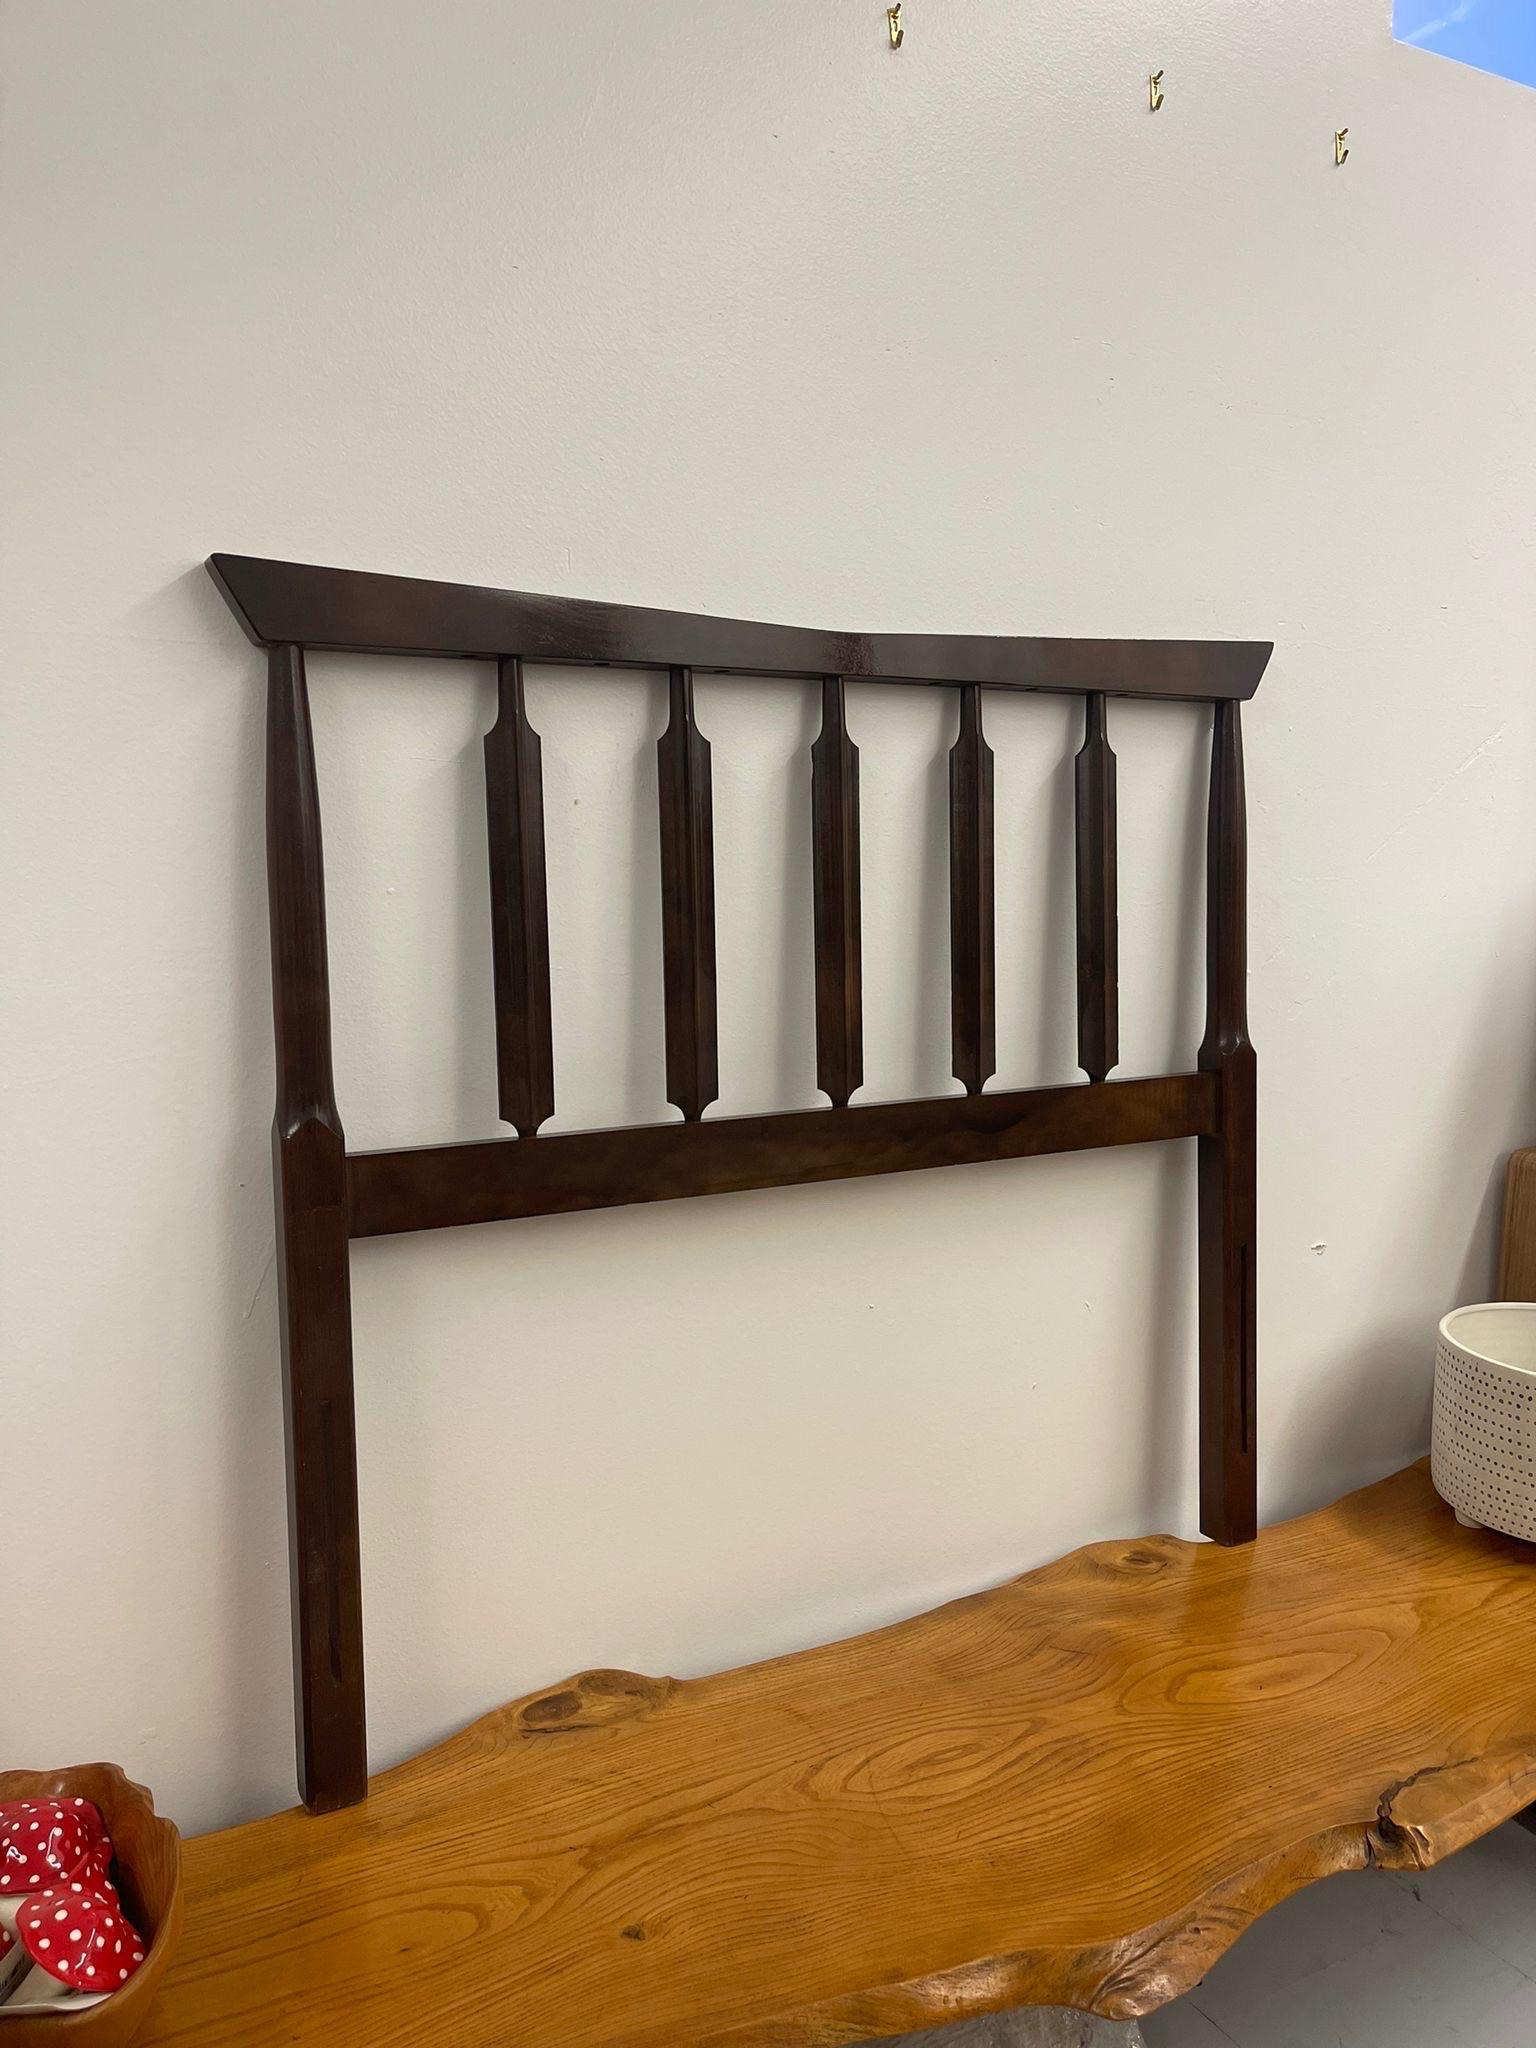 Vintage Spindle Headboard with Metal Bed Frame Included. Most Likely Twin Sized , buyer to Verify Size andGiven Dimensions. Vintage Condition Consistent with Age as Pictured.

Dimensions. 40 W ; 36 1/2 H